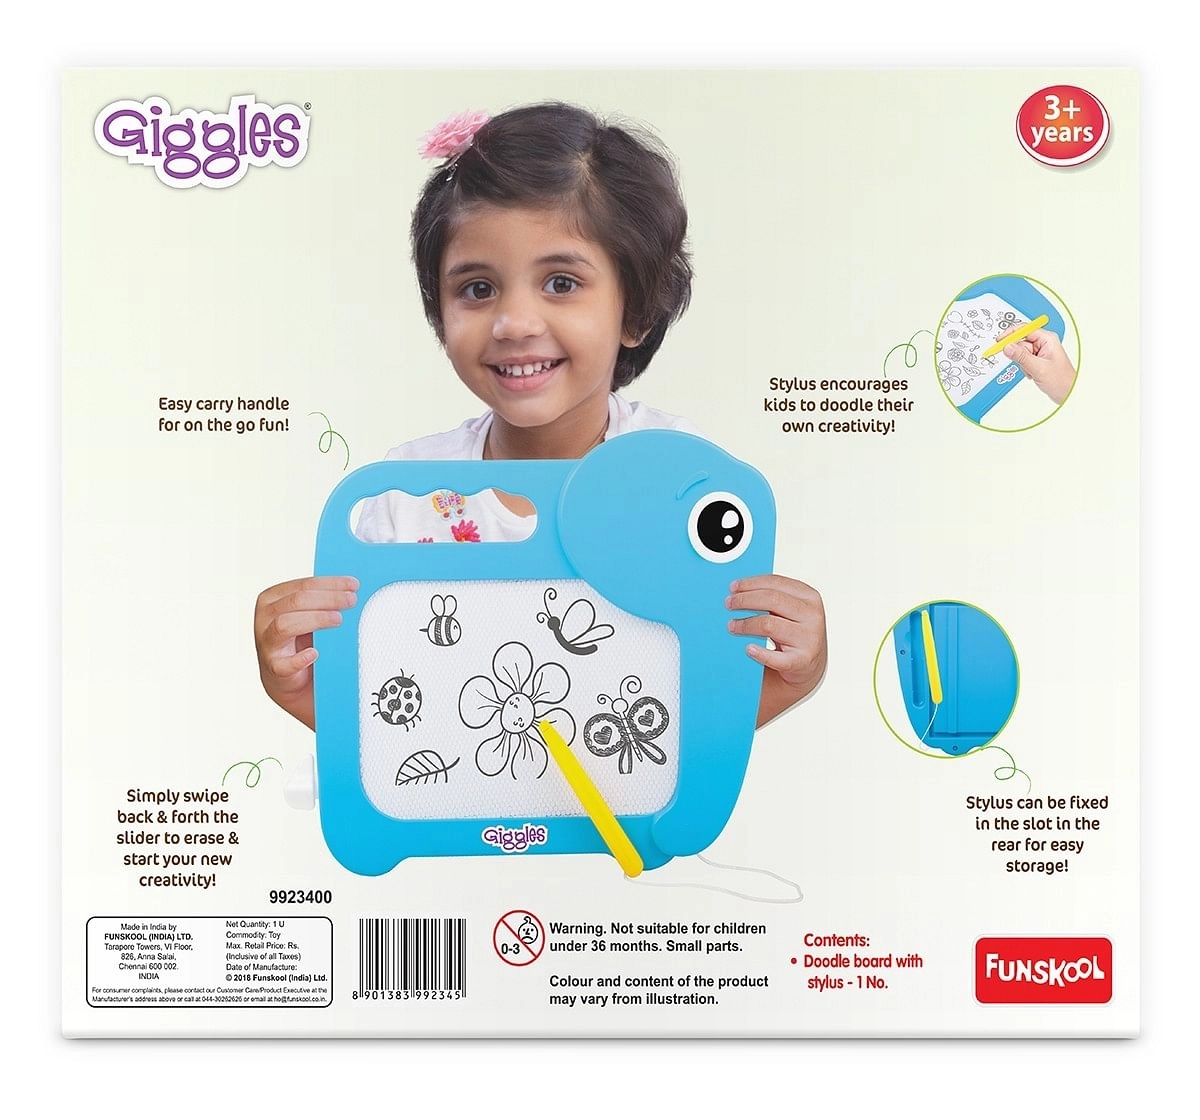 Giggles Mini Doodle Early Learner Toys for Kids Age 2Y+